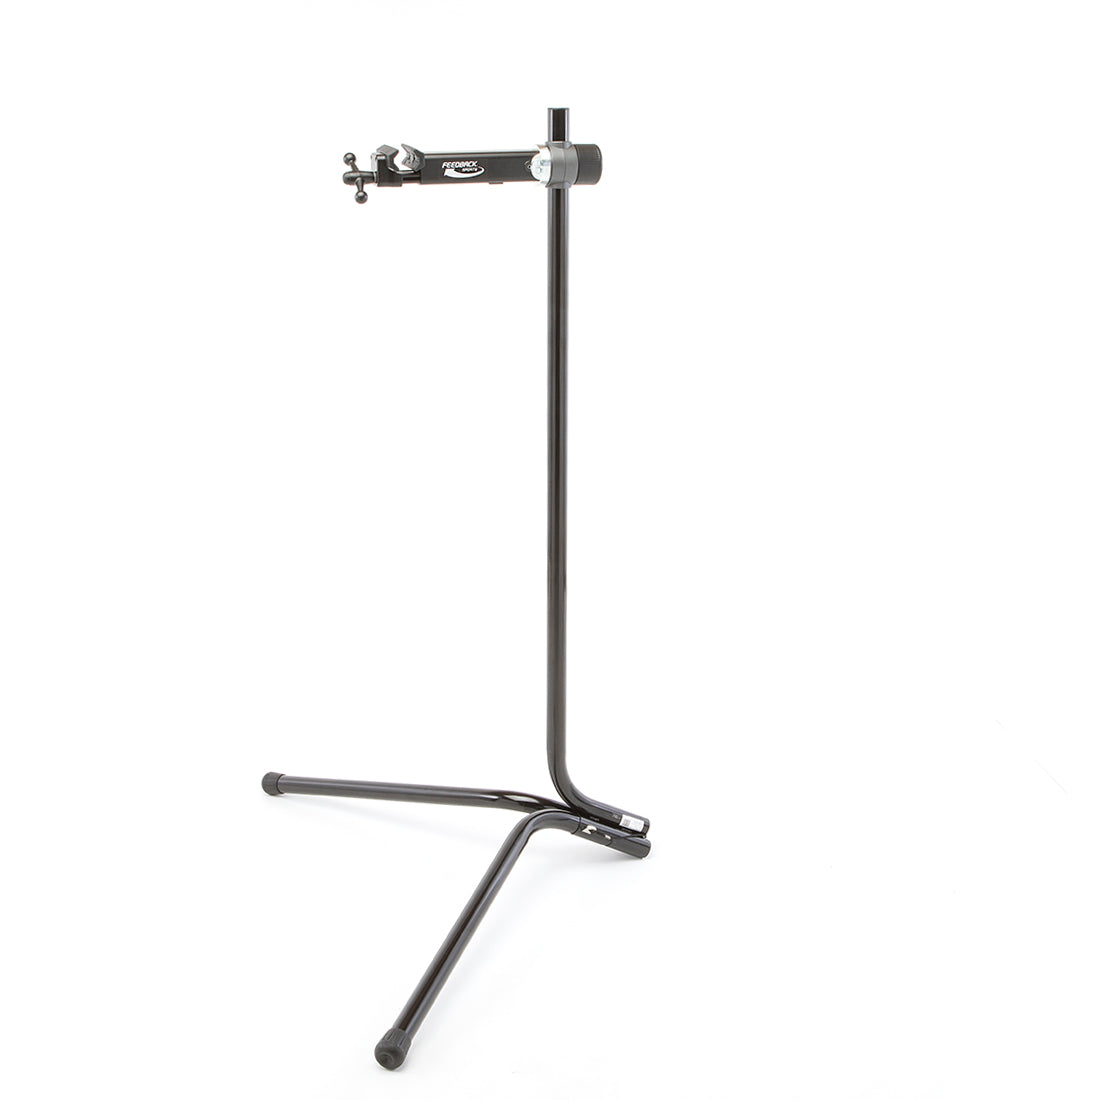 Feedback Sports recreational bike repair stand deployed for use on white.